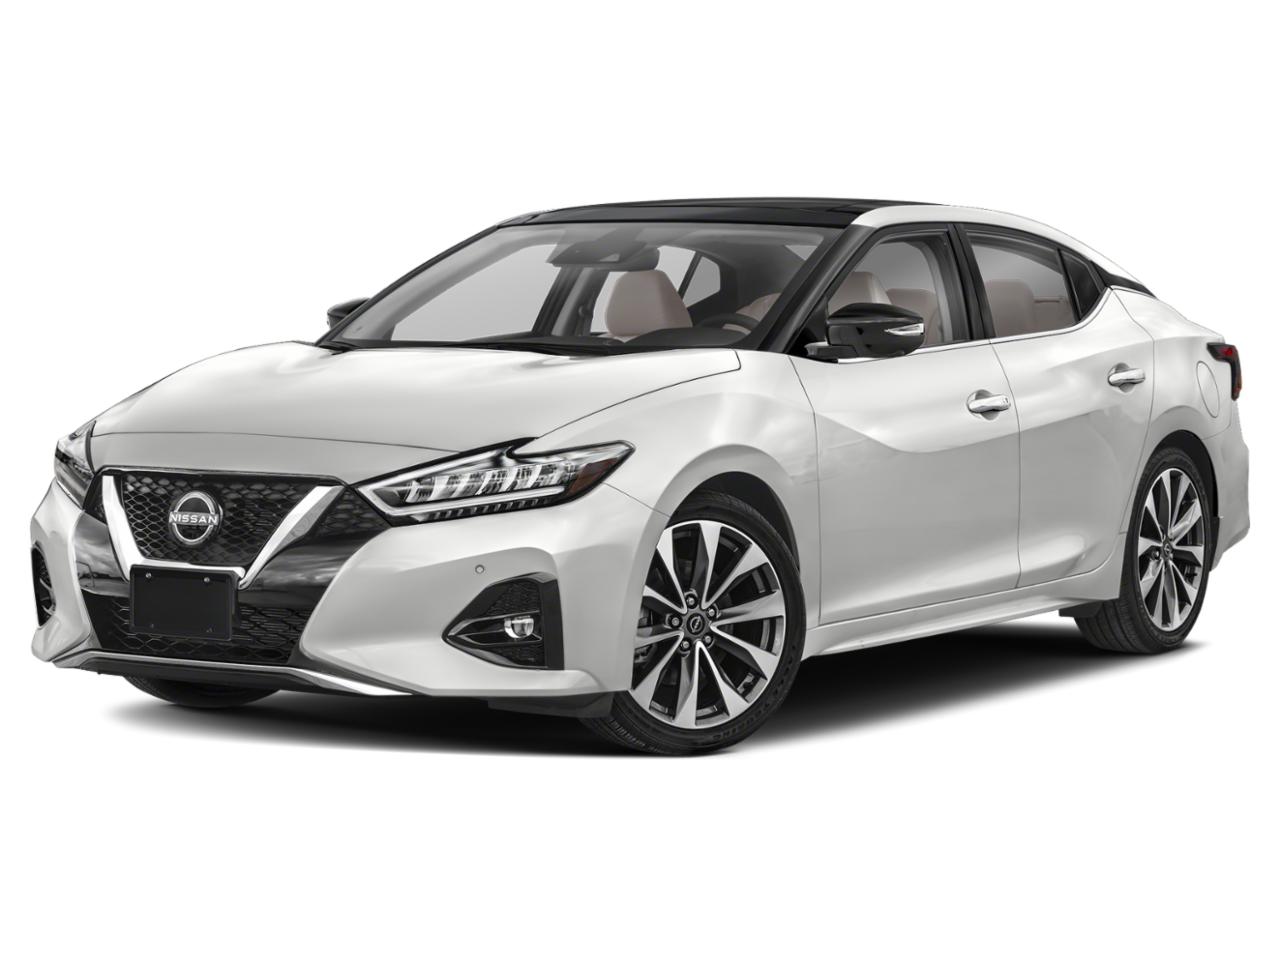 2020 Nissan Maxima Prices, Reviews, and Photos - MotorTrend